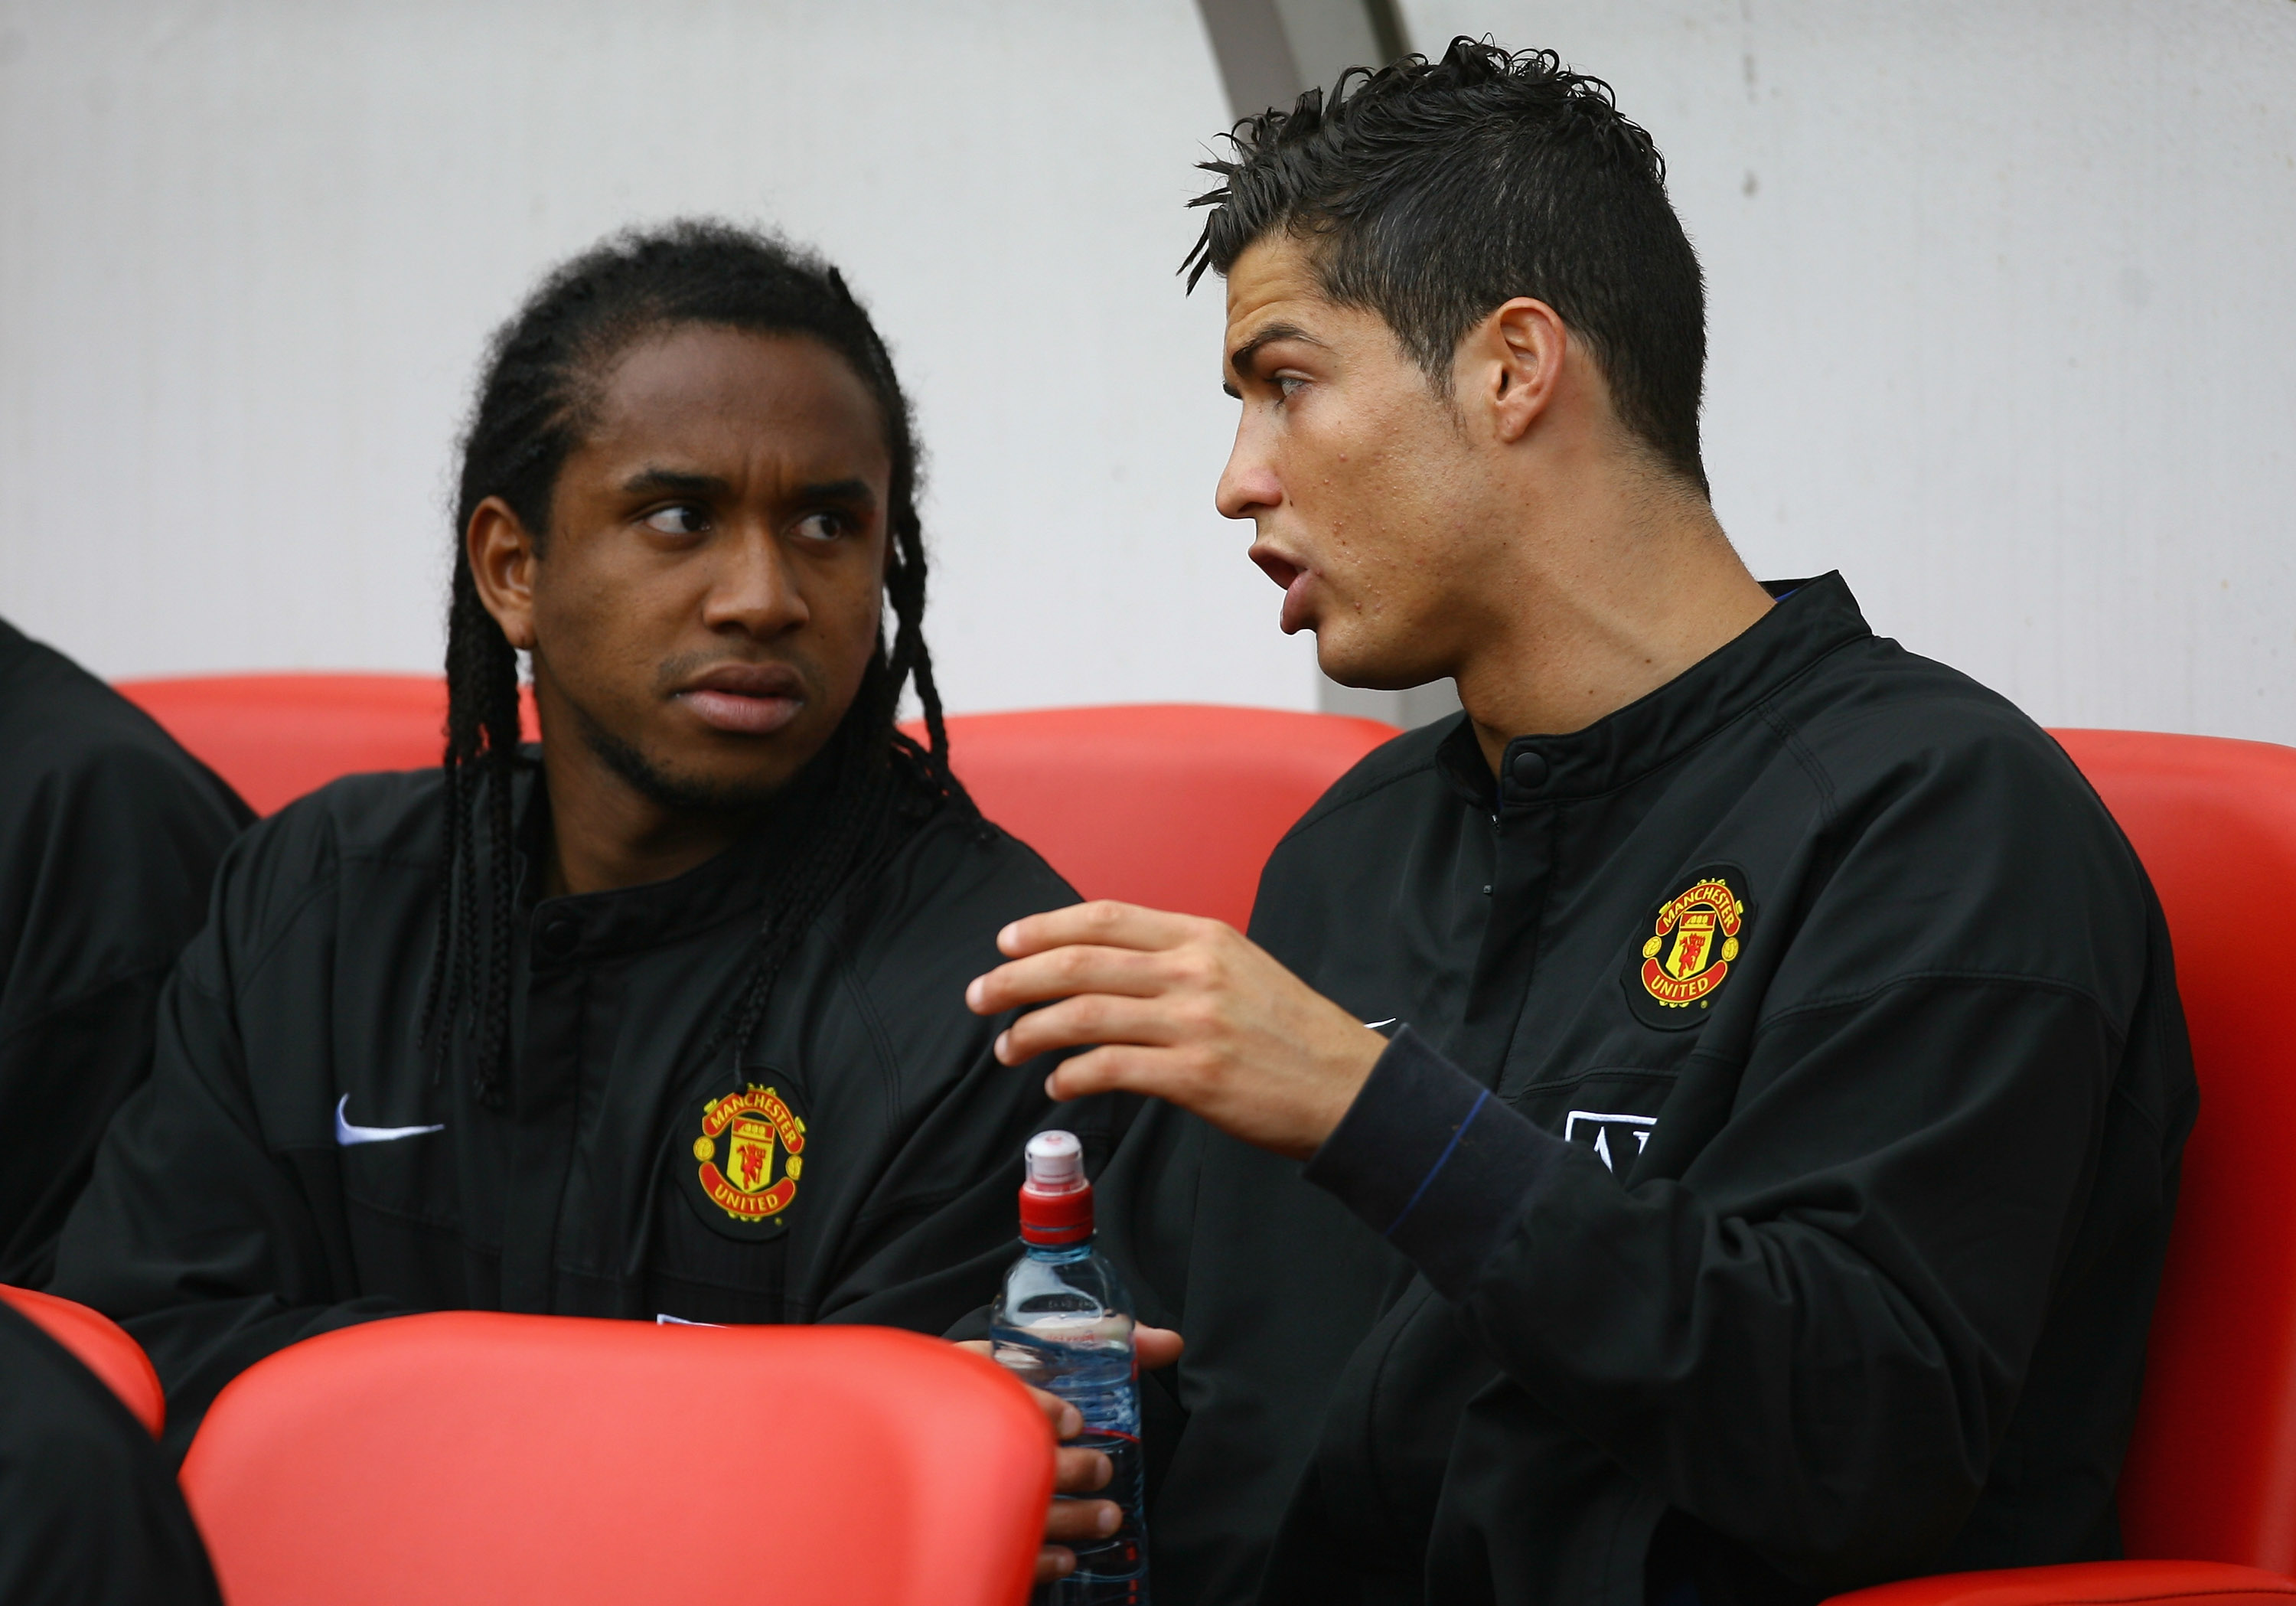 SUNDERLAND, UNITED KINGDOM - APRIL 11: Cristiano Ronaldo (R) of Manchester United chats with team mate Anderson as they sit on the bench prior to the Barclays Premier League match between Sunderland and Manchester United at The Stadium of Light on April 1